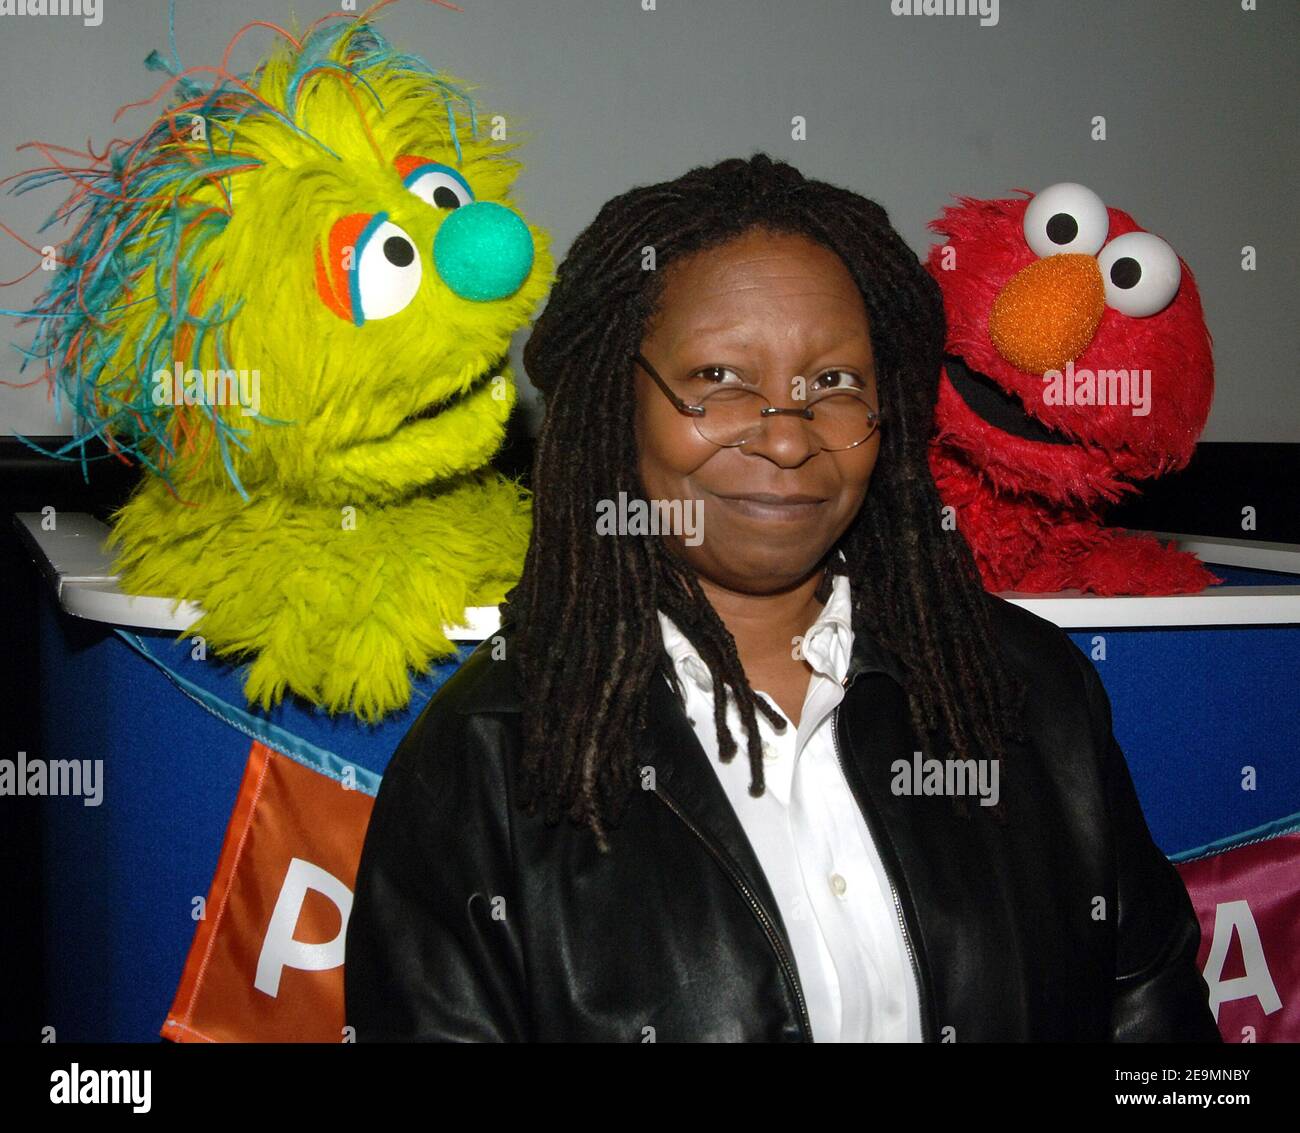 Whoopi Goldberg poses with the new muppet Azibo (left) and Elmo after a press conference to announce "Panwapa", a new world wide initiateve from Sesame Street Workshop at the United Nations International School in New York on October 10, 2007. (Photo by Laura Cavanaugh/Sipa USA) Stock Photo